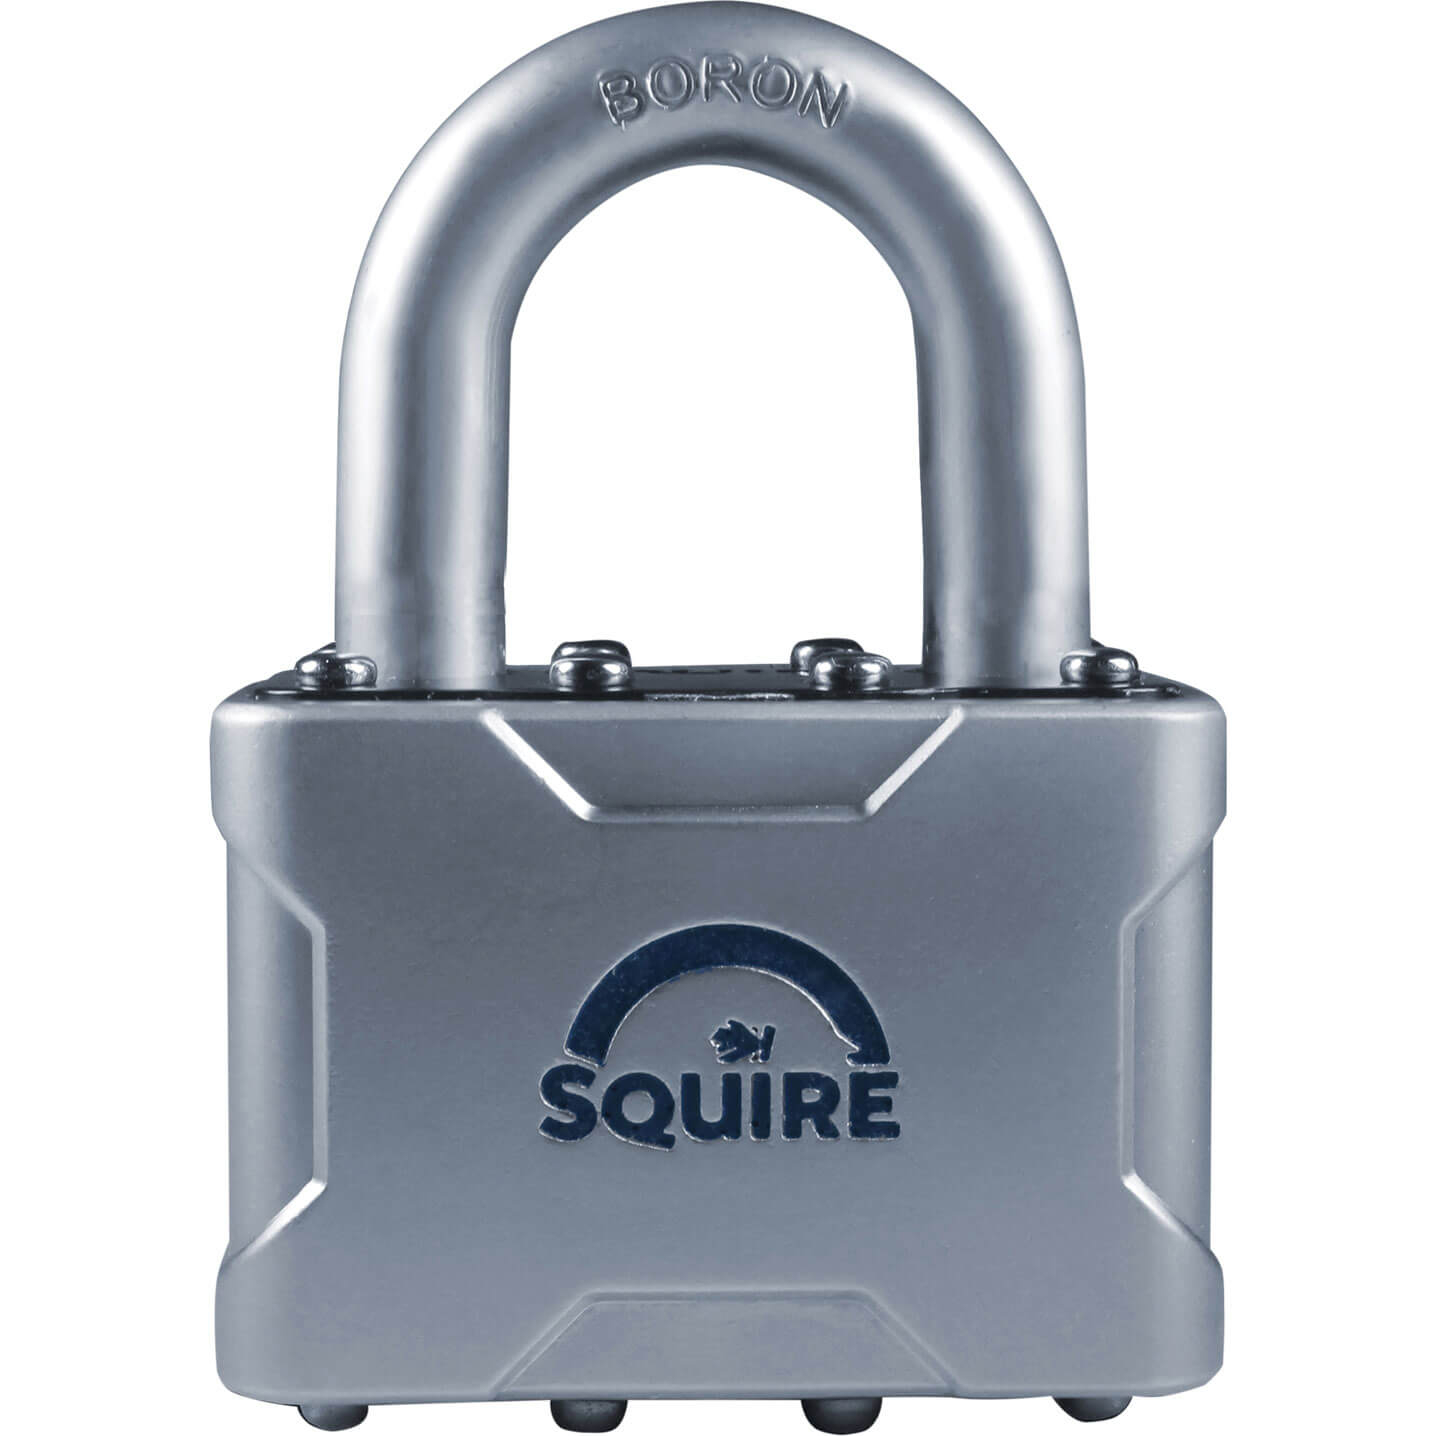 Image of Henry Squire Vulcan Boron Shackle Padlock 45mm Standard